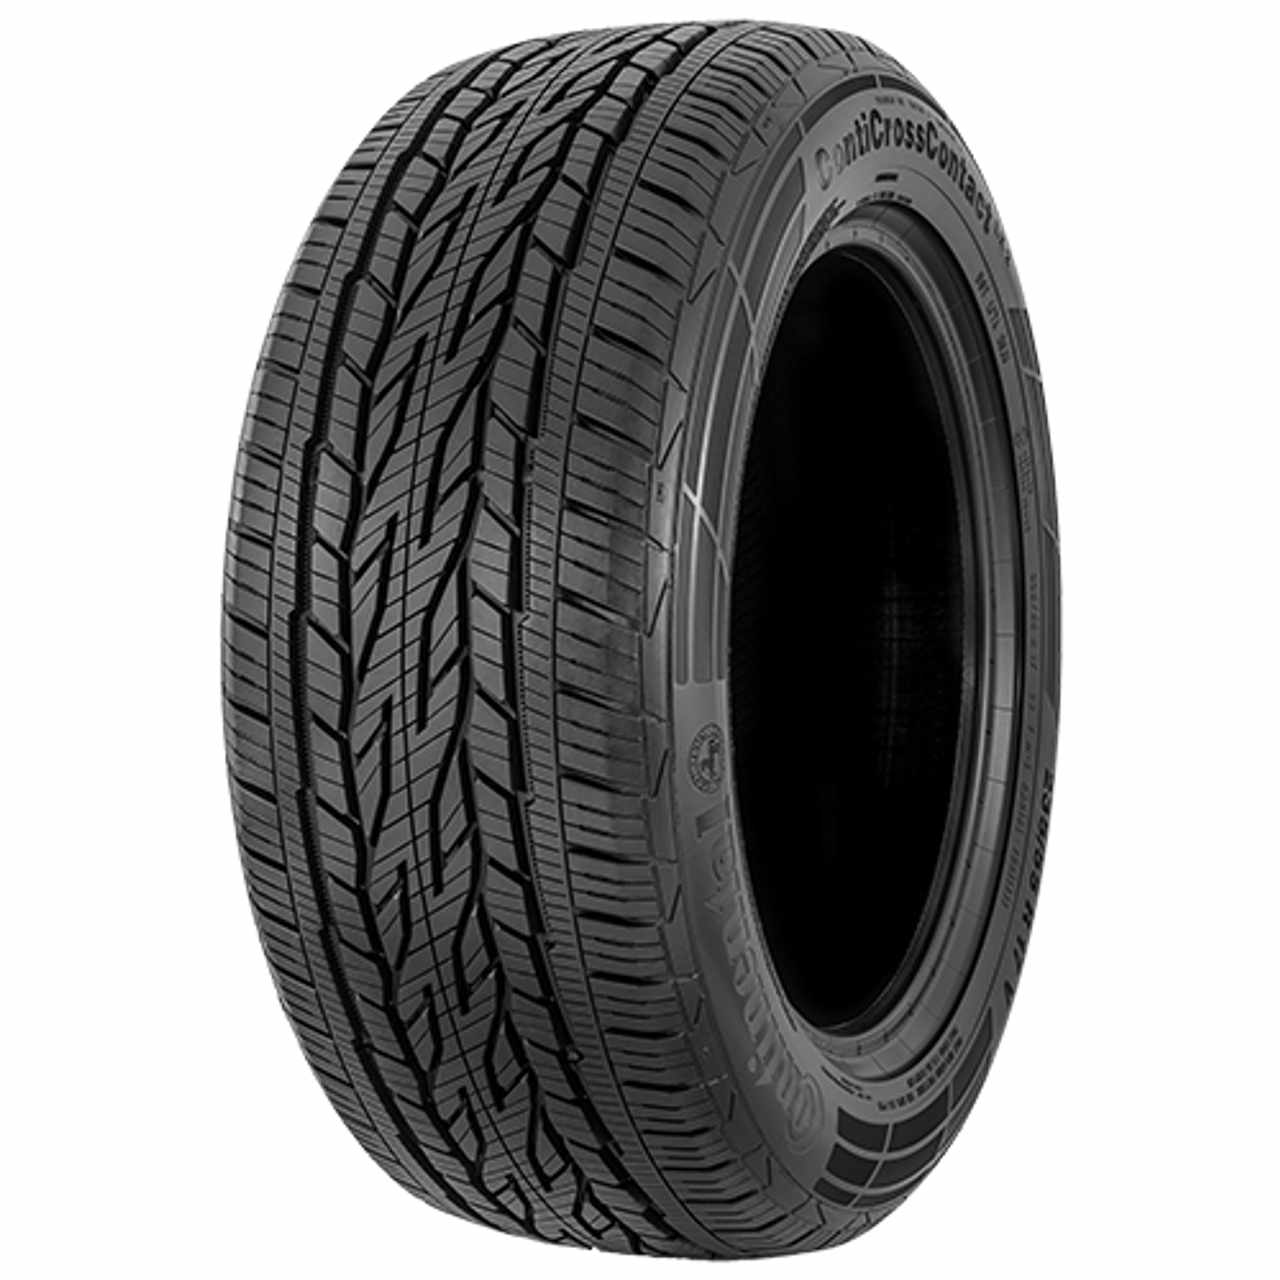 CONTINENTAL CONTICROSSCONTACT LX 2 225/70R15 100T FR BSW von Continental